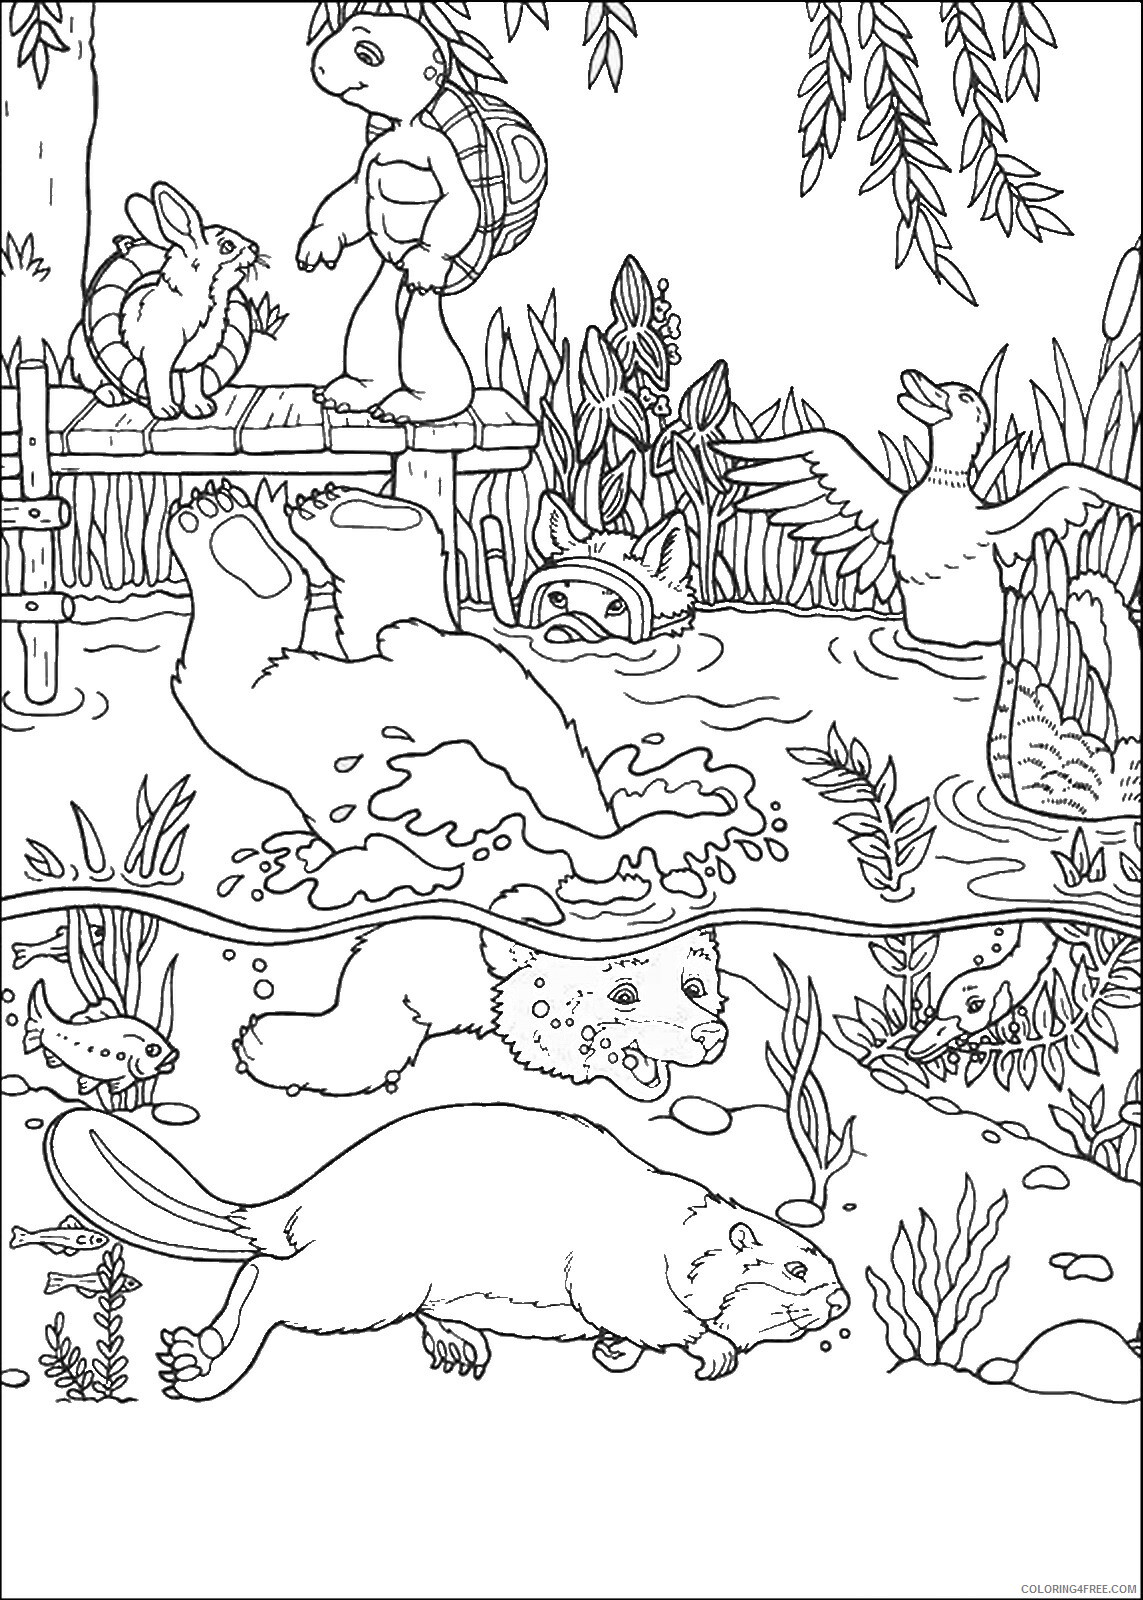 Franklin and Friends Coloring Pages TV Film franklin_cl_09 Printable 2020 03013 Coloring4free